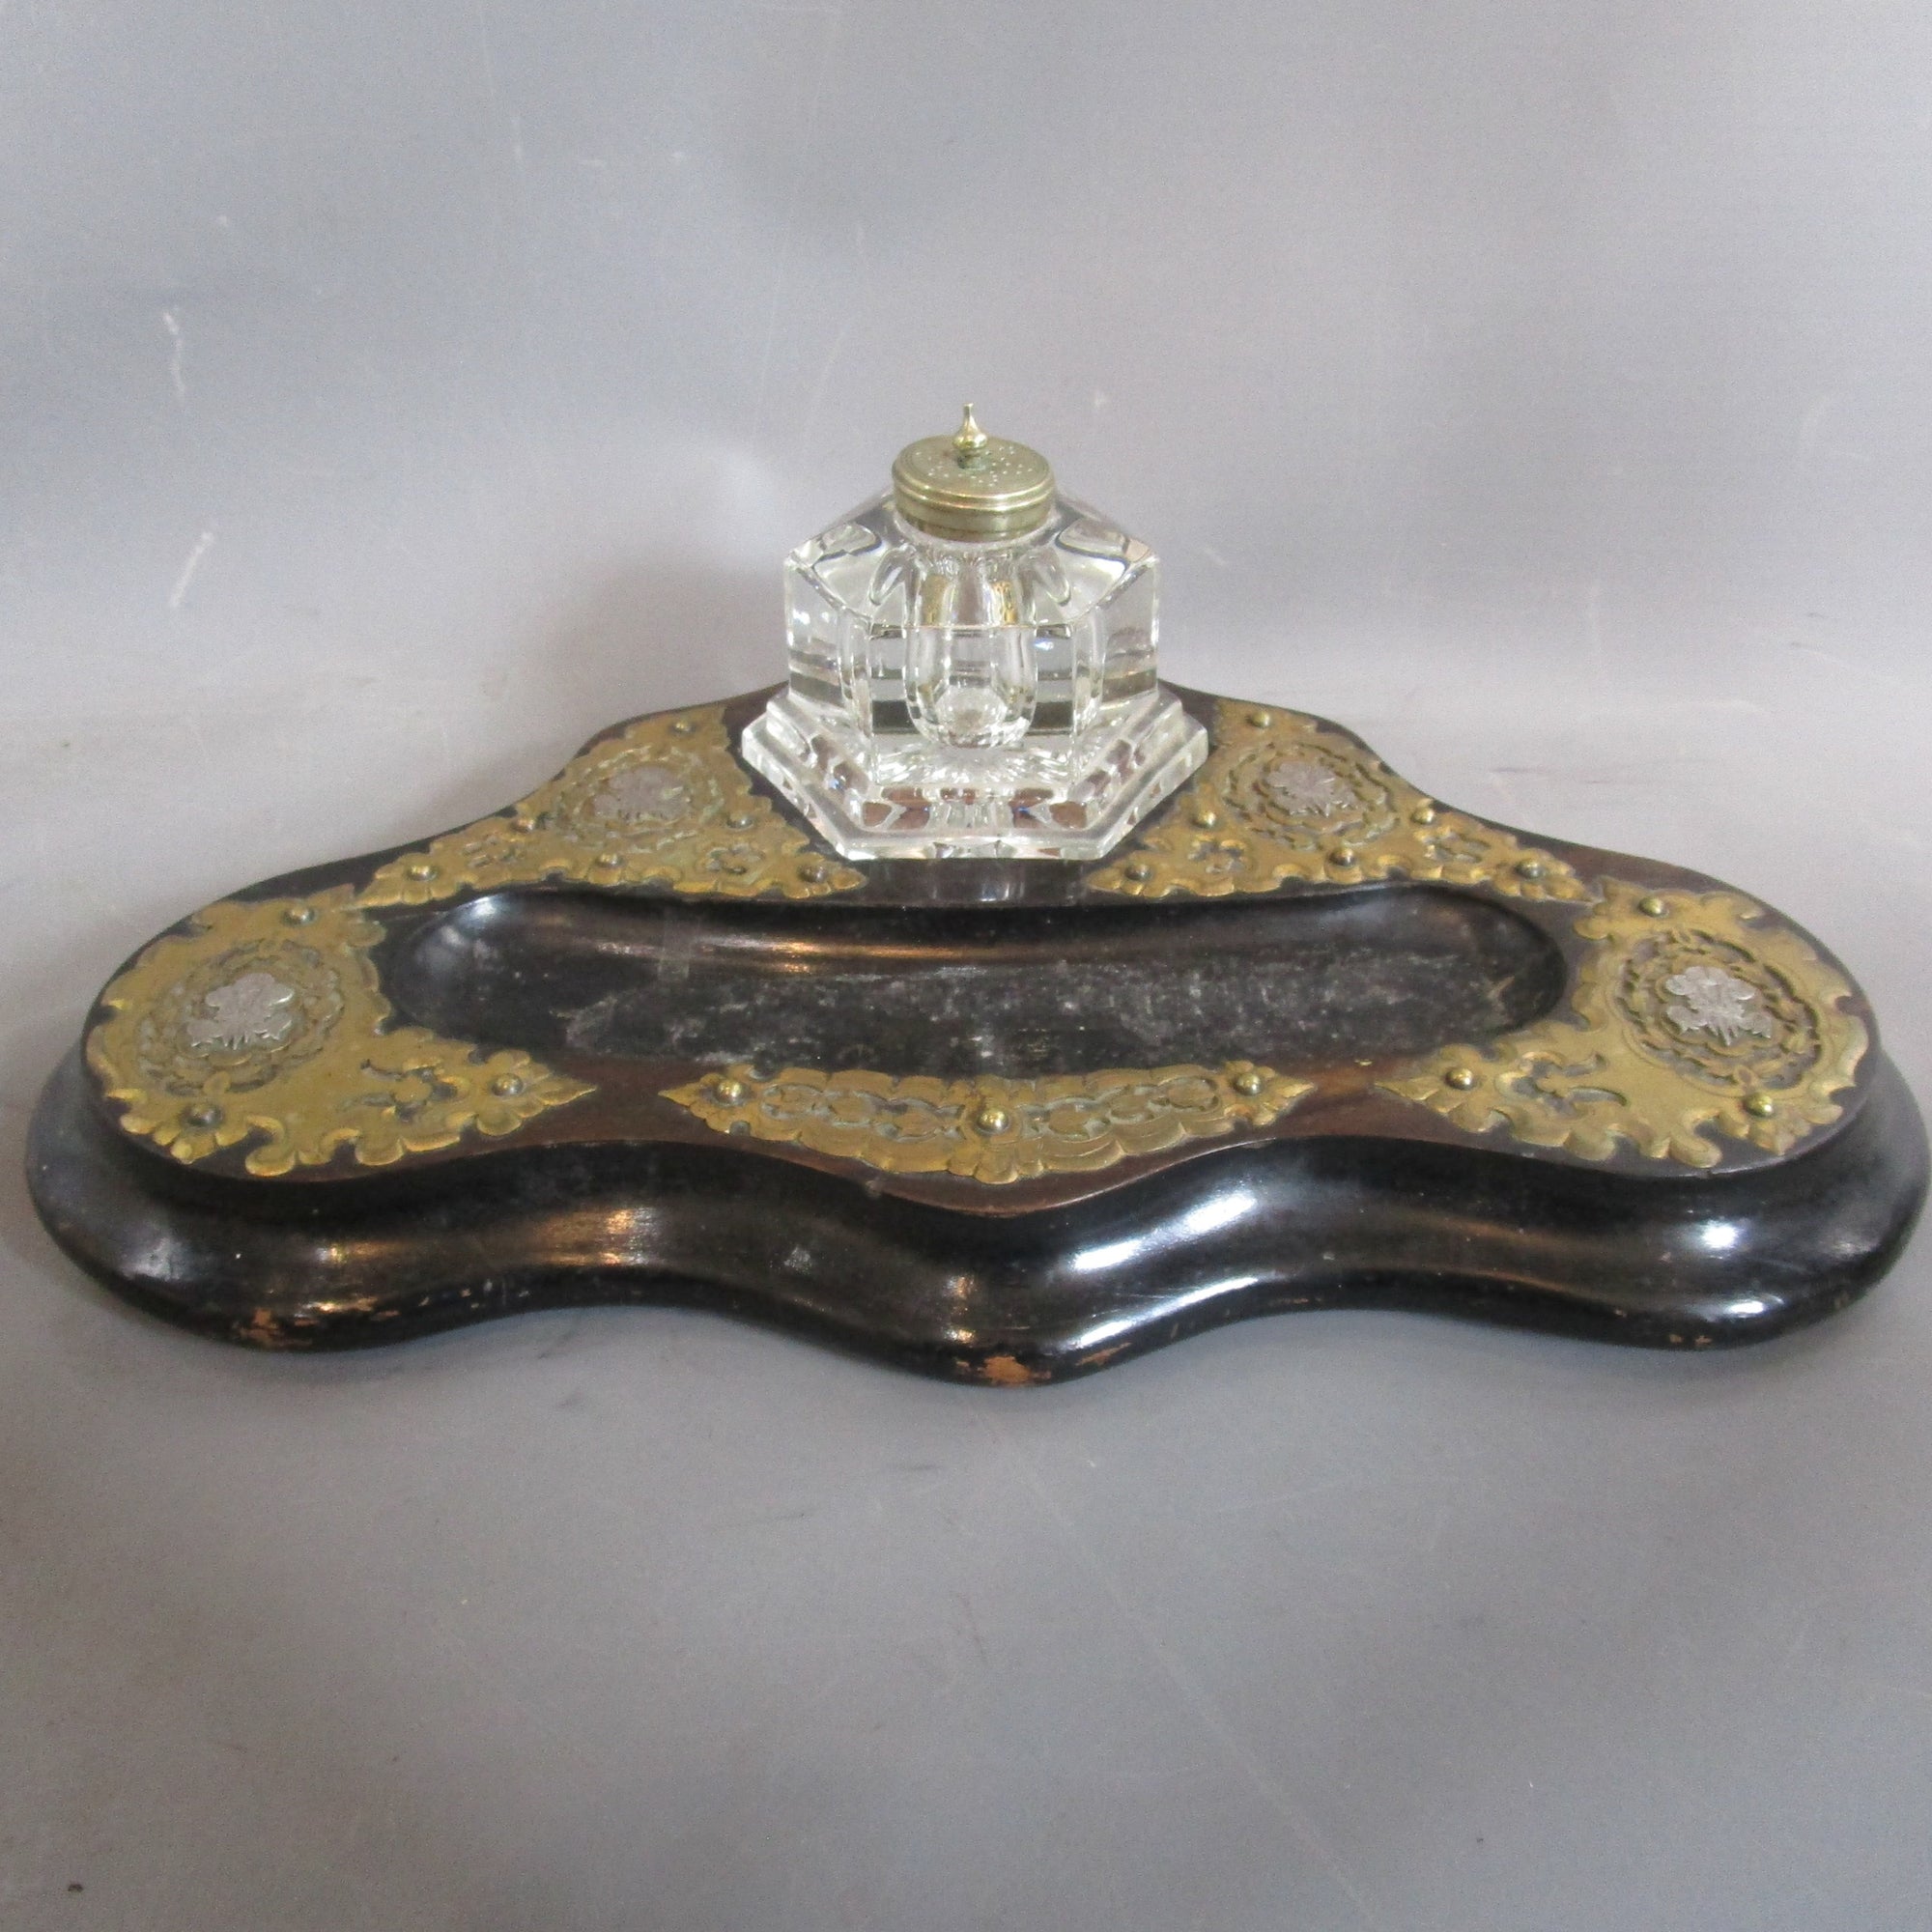 Ormolu Silver Mounted Ebony Writing Stand Prince Of Wales Ich Dien Crested Antique Victorian c1880